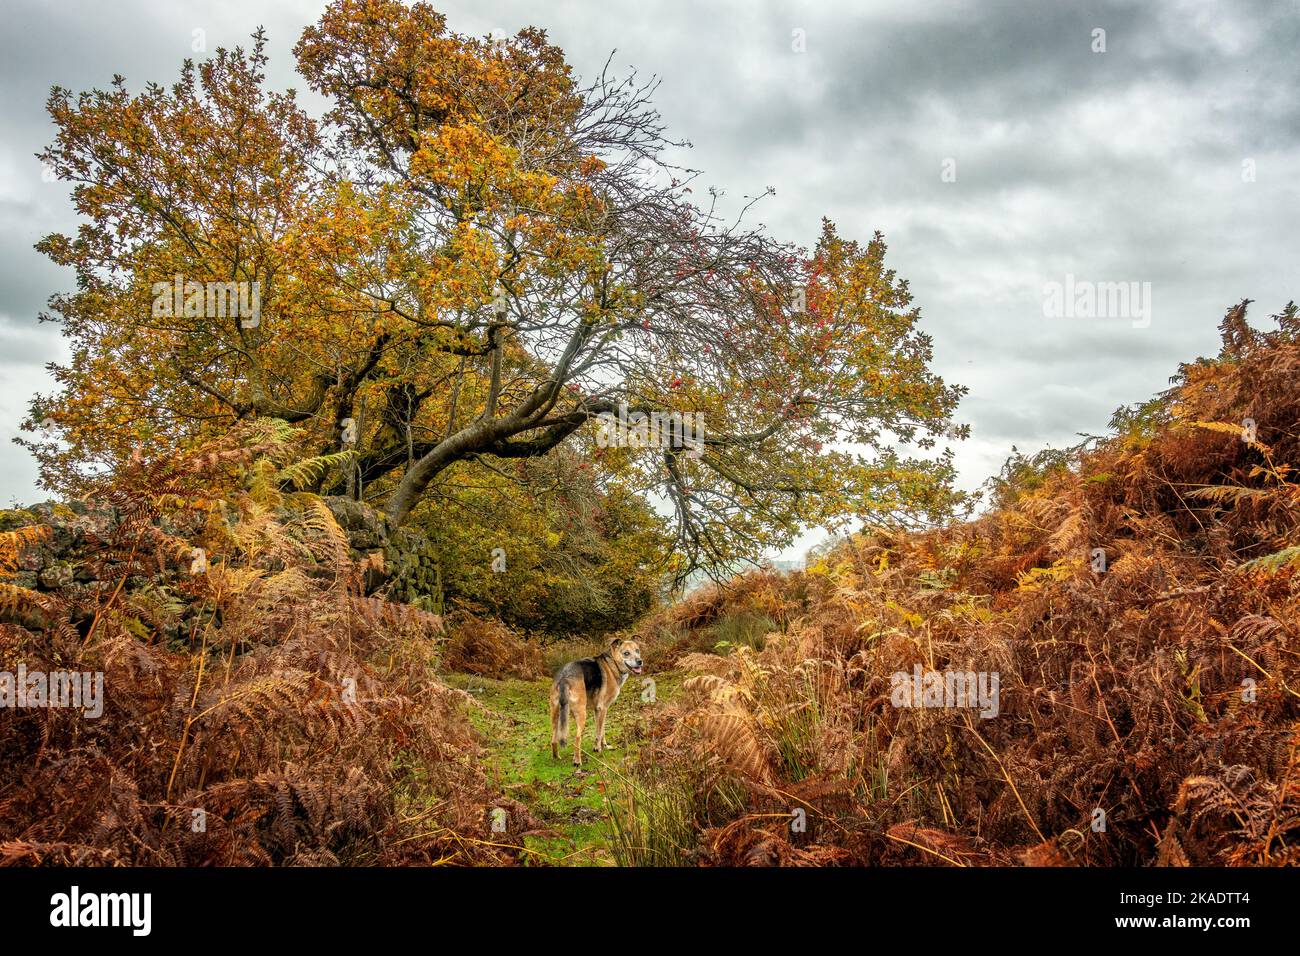 Dog in a moorland autumnal scene with golden leaves on trees and bracken changing colour on the moors, Burley Moor, West Yorkshire, UK Stock Photo